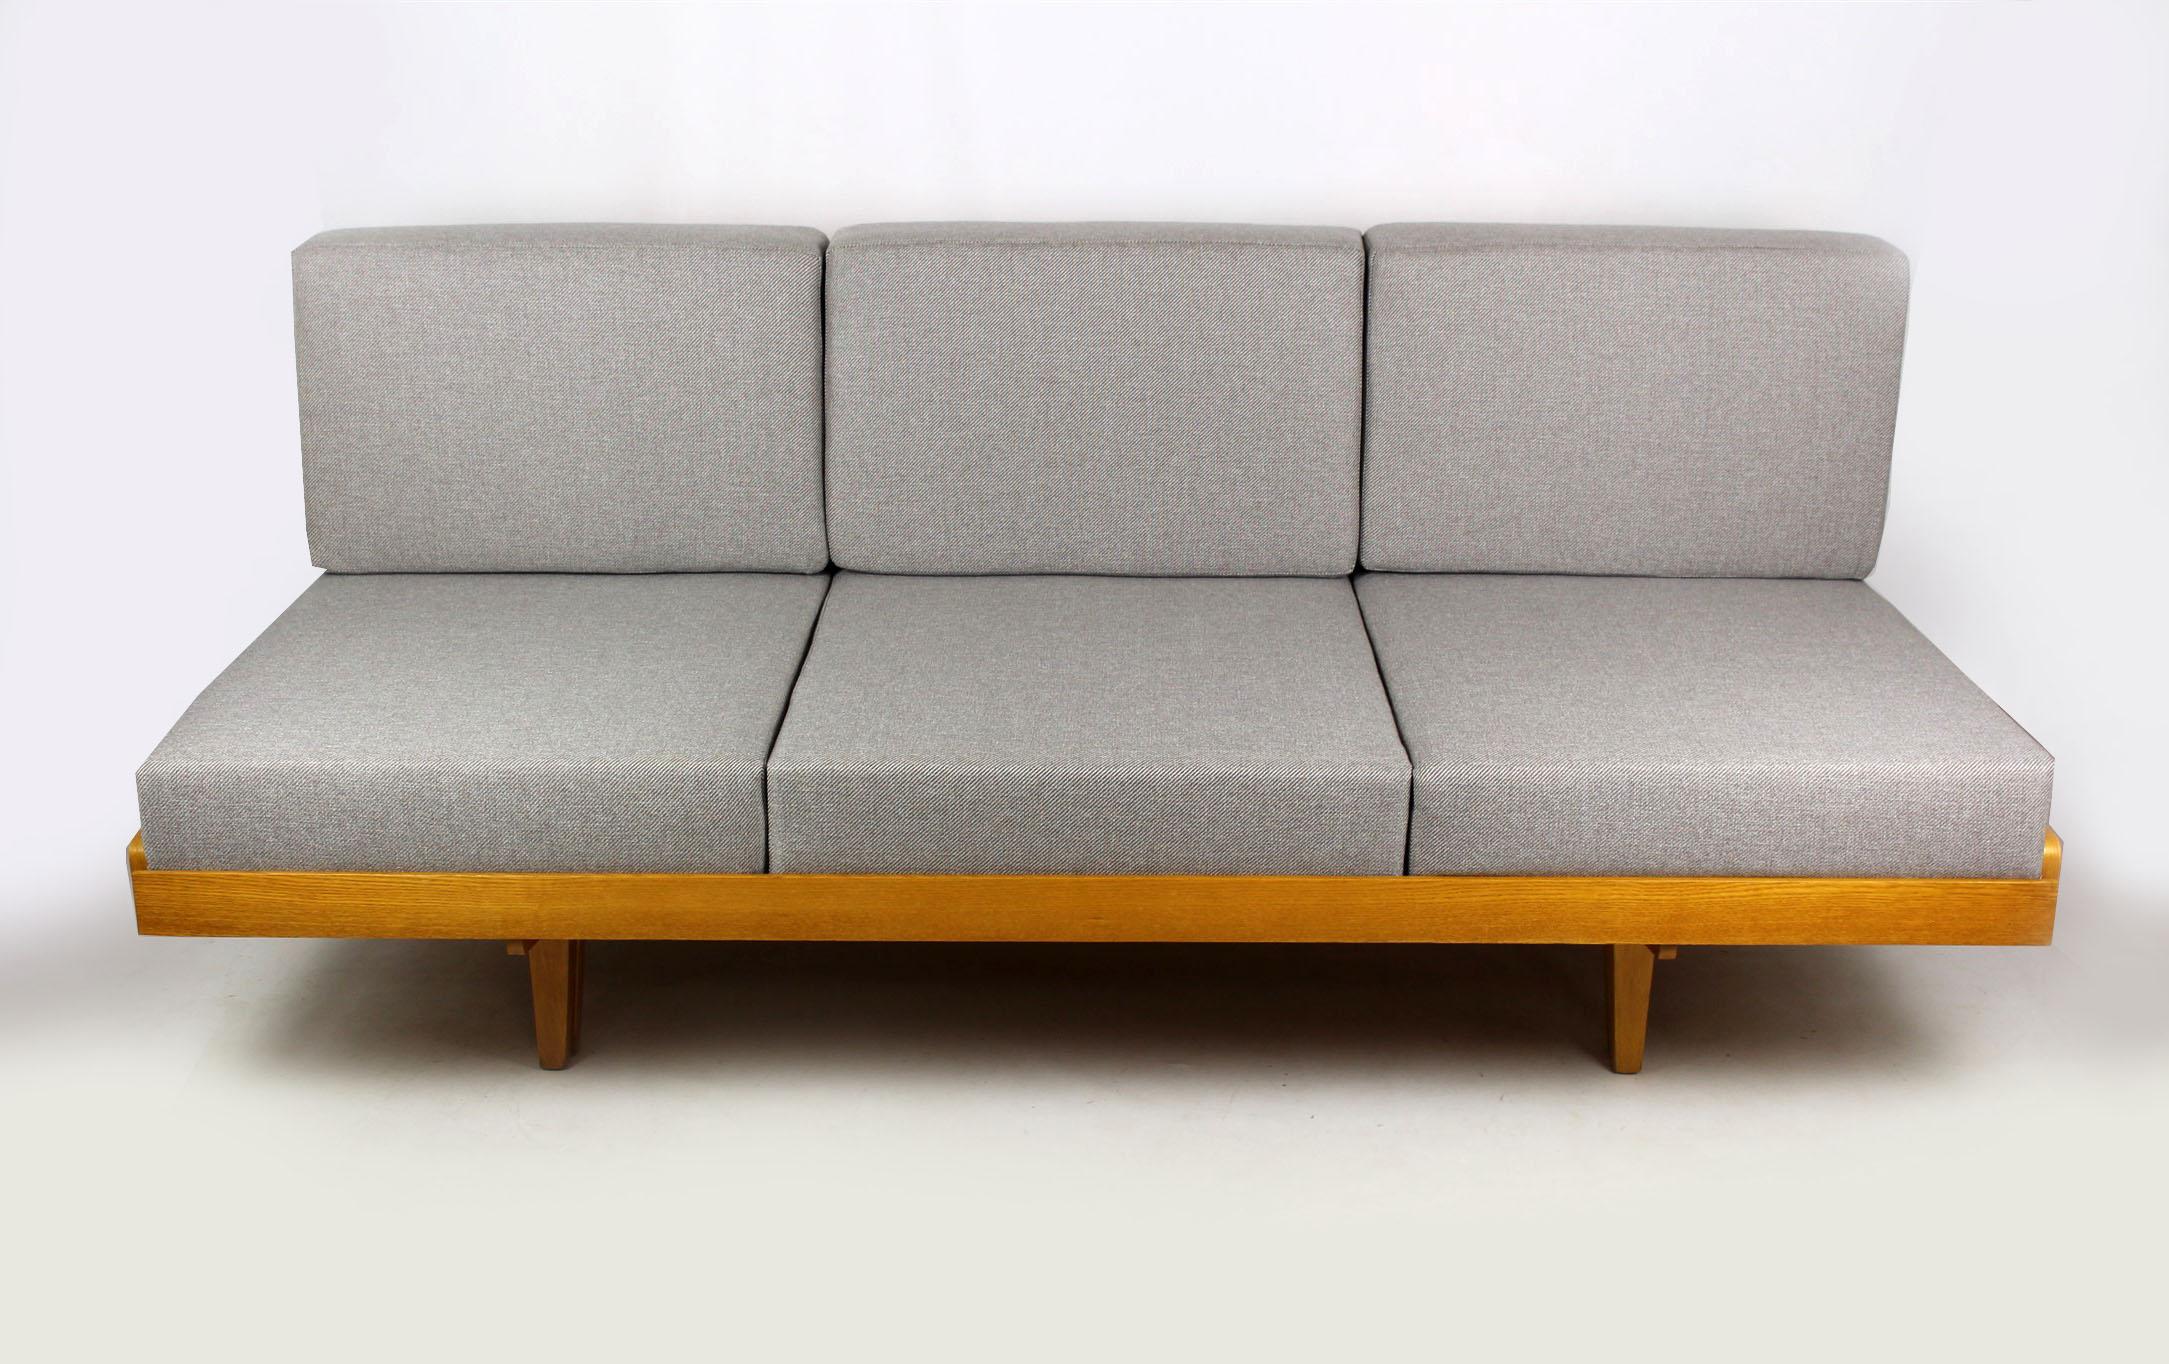 Midcentury sofa bed manufactured by Jitona in the 1960s. Made of ash veneered wood. The couch has been renovated, with restored woodwork, and new pillows upholstered with fabric that is resistance to dirt and abrasion. The couch can be simply